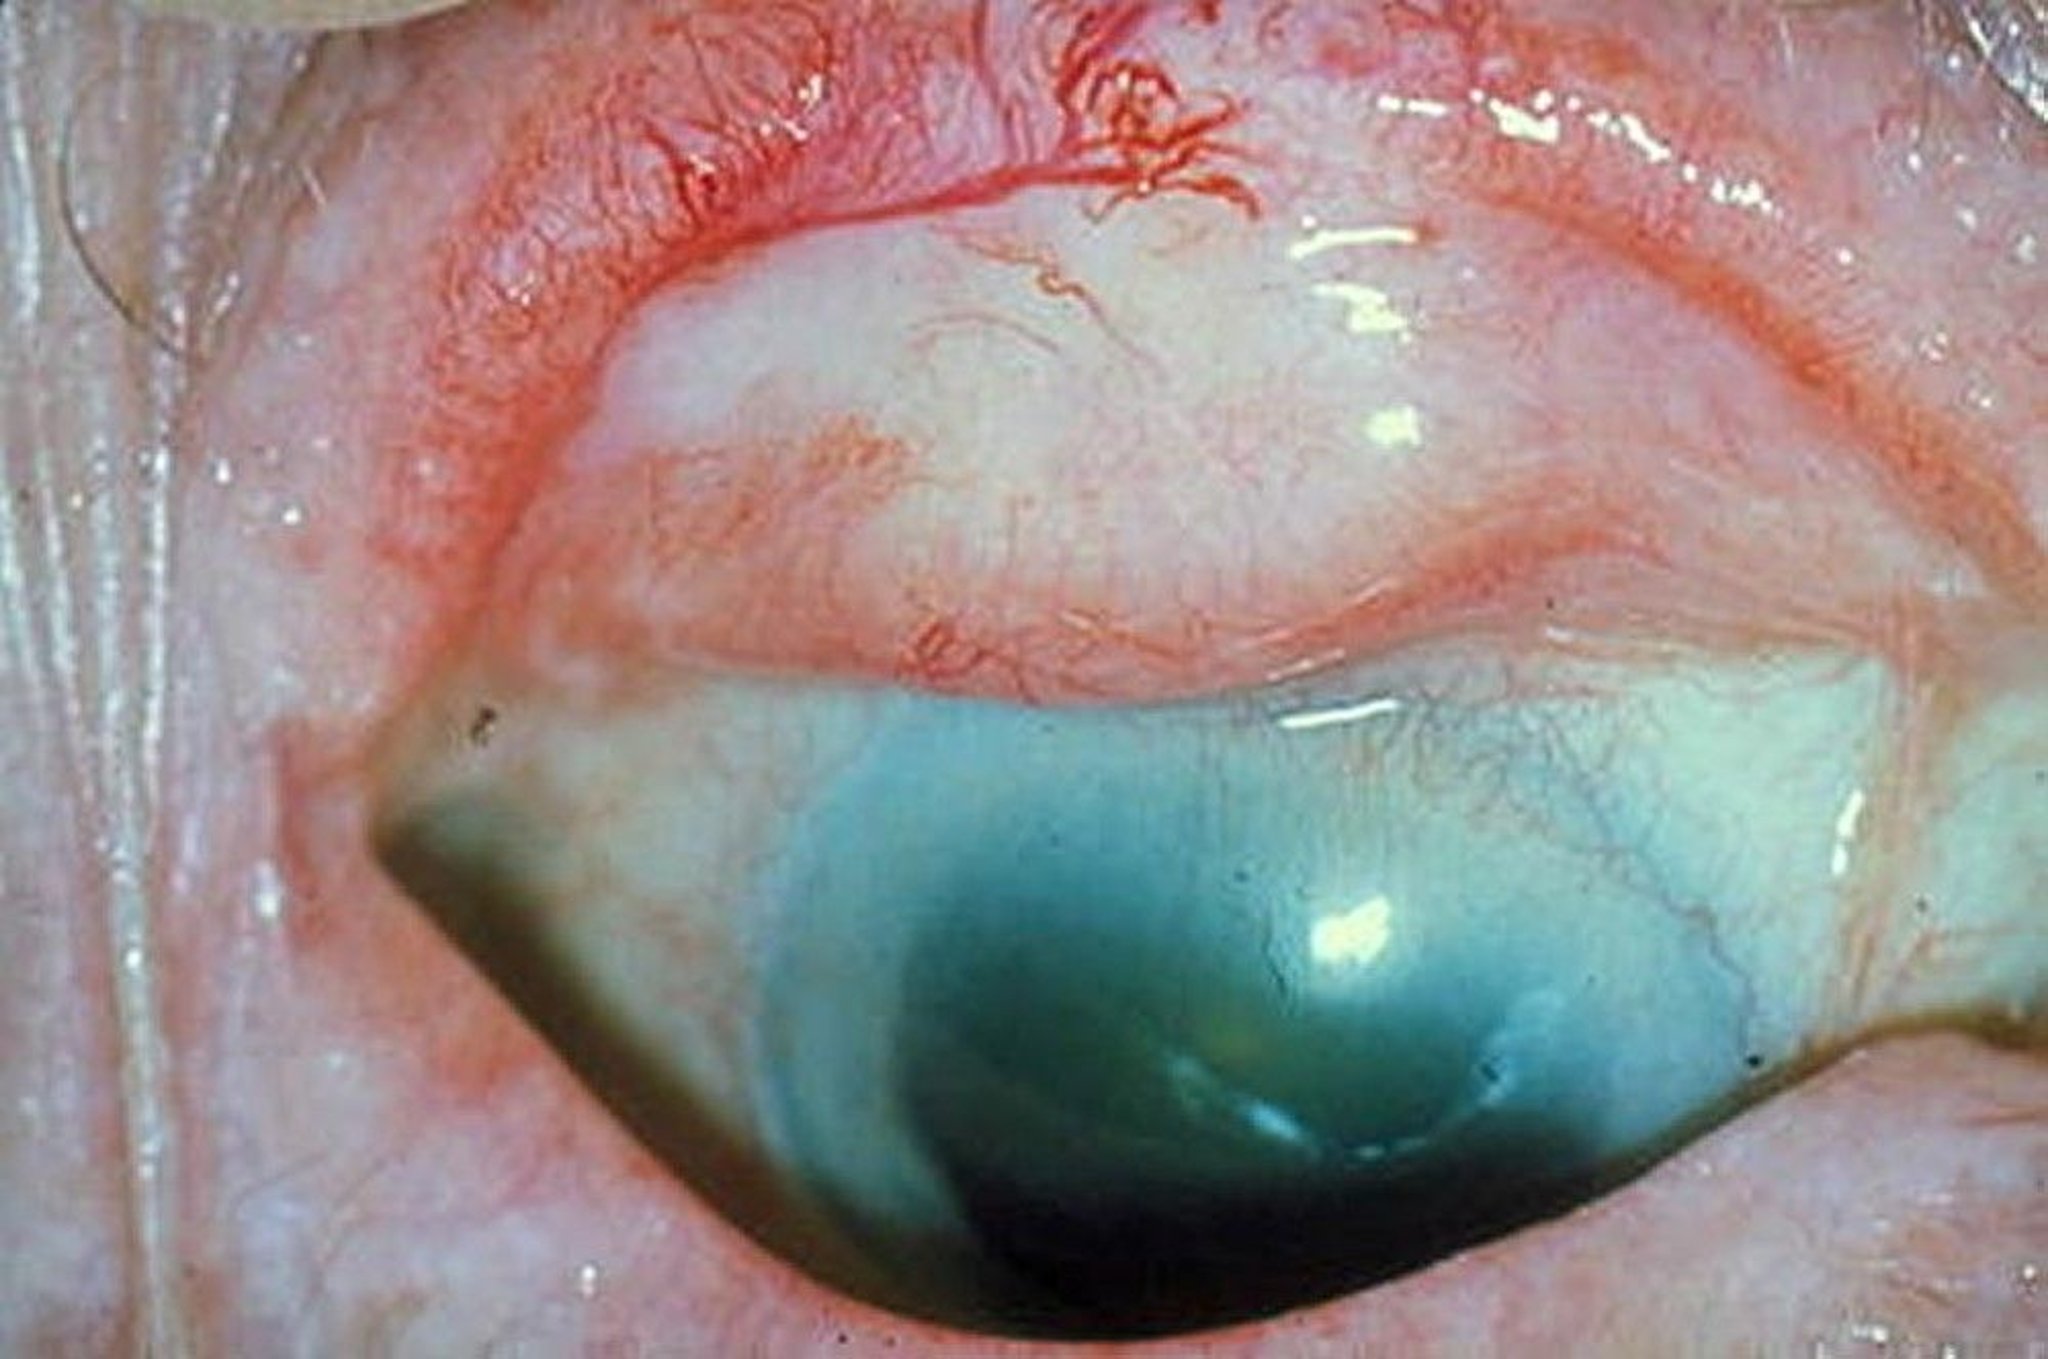 Trachomatous Scarring (TS) and Corneal Opacity (CO)